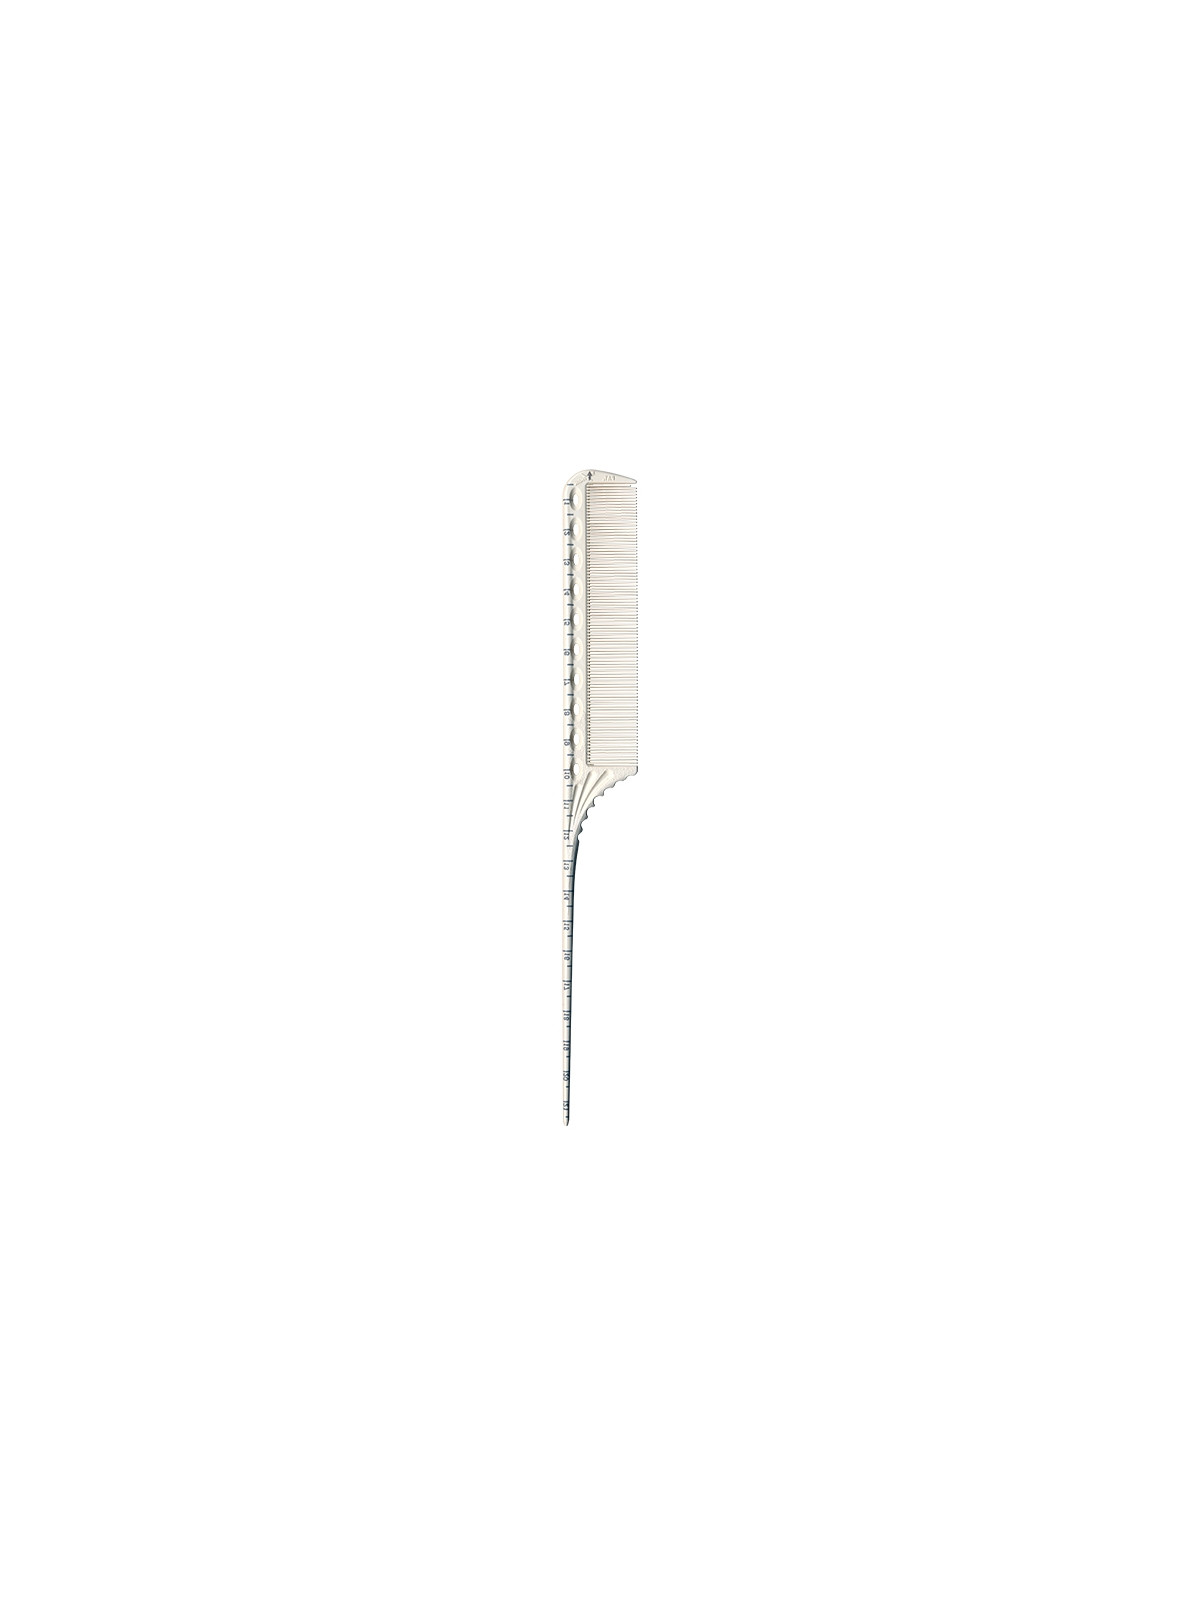 Y.S. Park G11 Fine Teeth Tail Comb with Guide 220mm